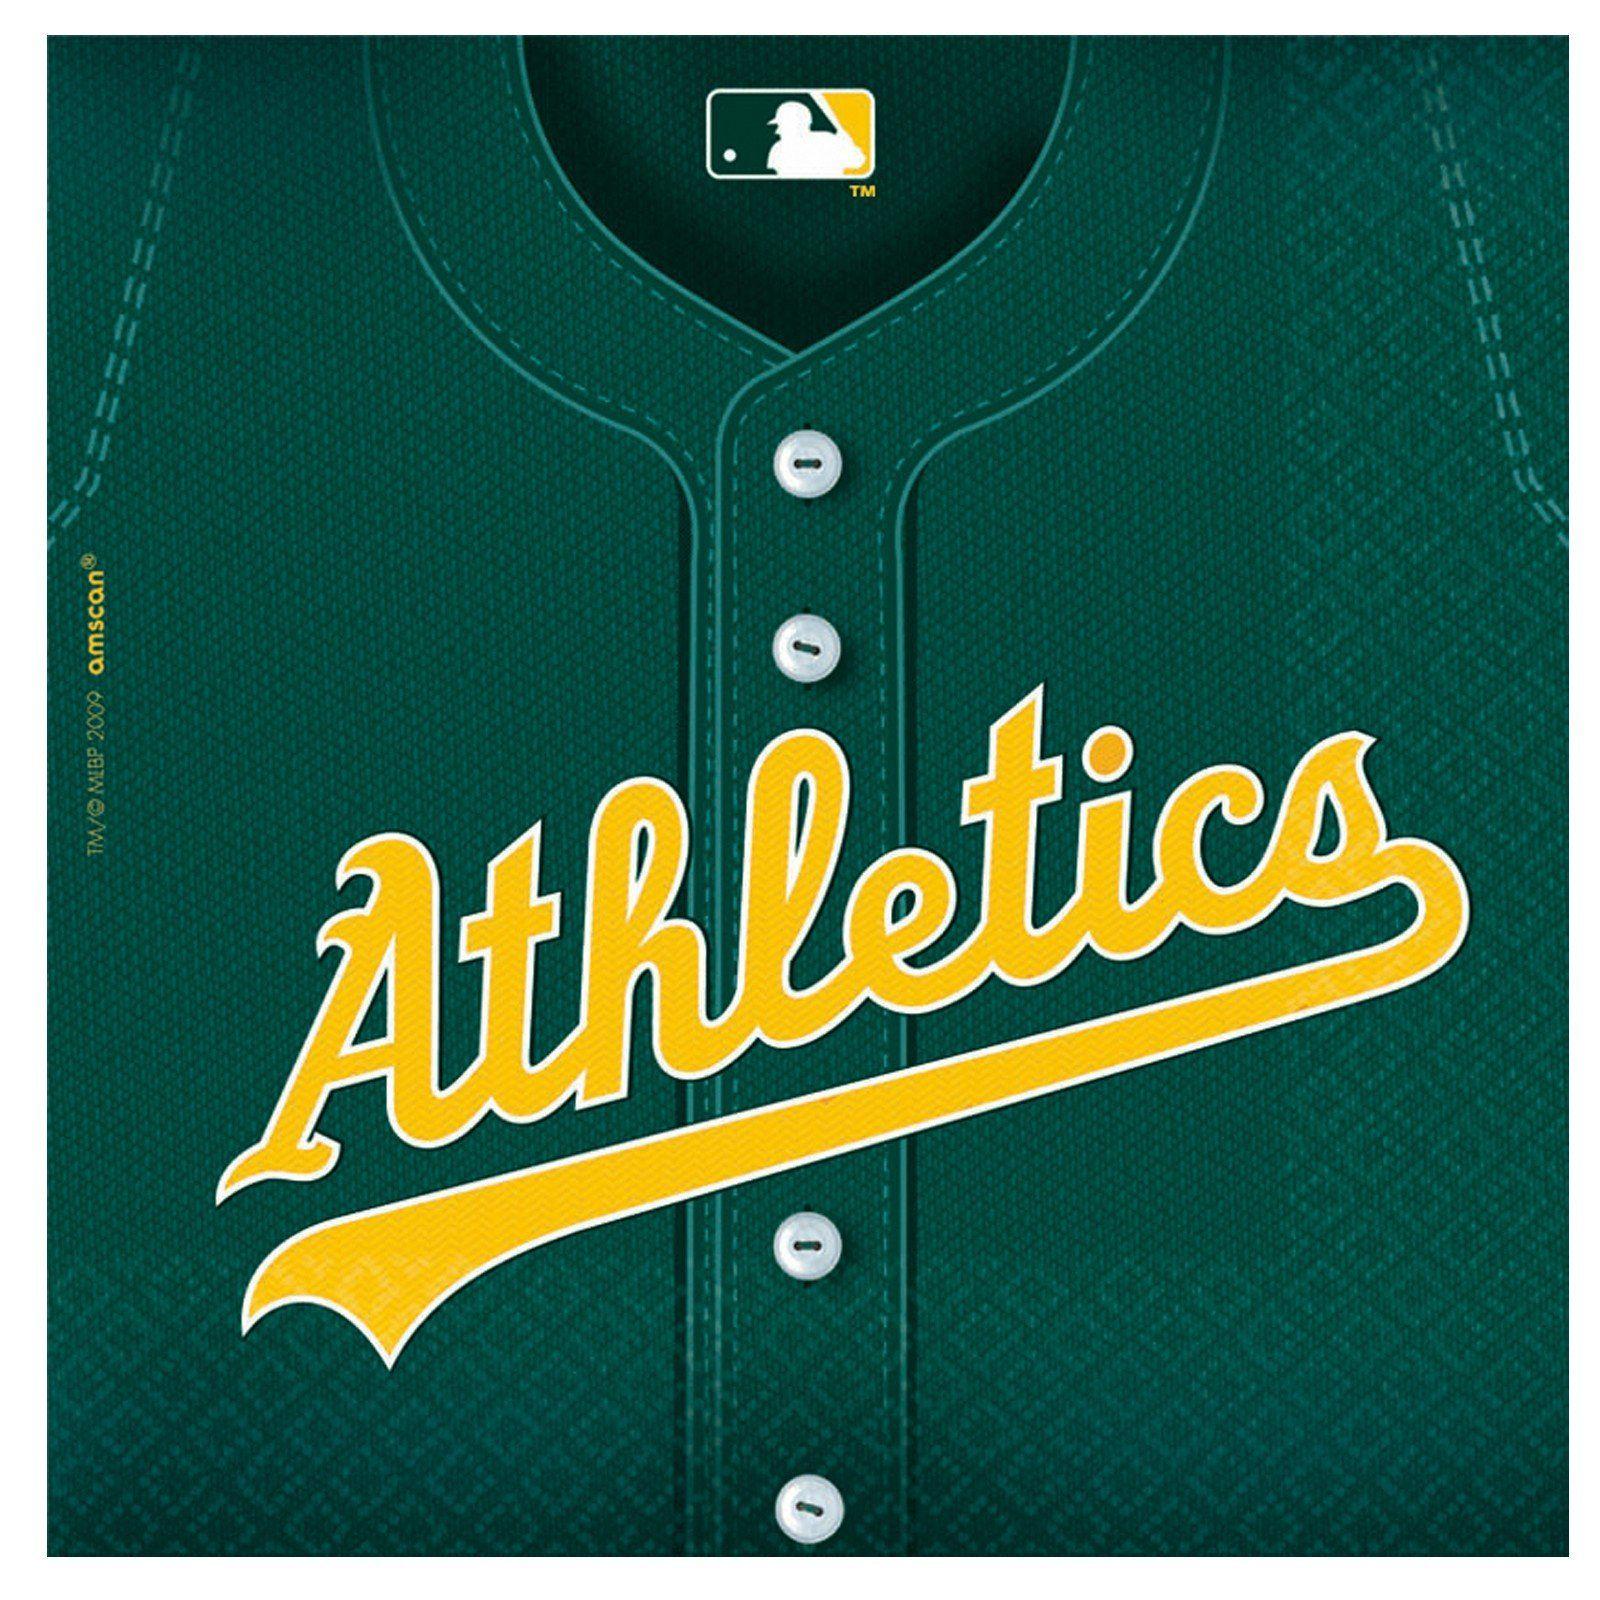 Oakland Athletics iPhone Wallpaper, Will be putting on my i…